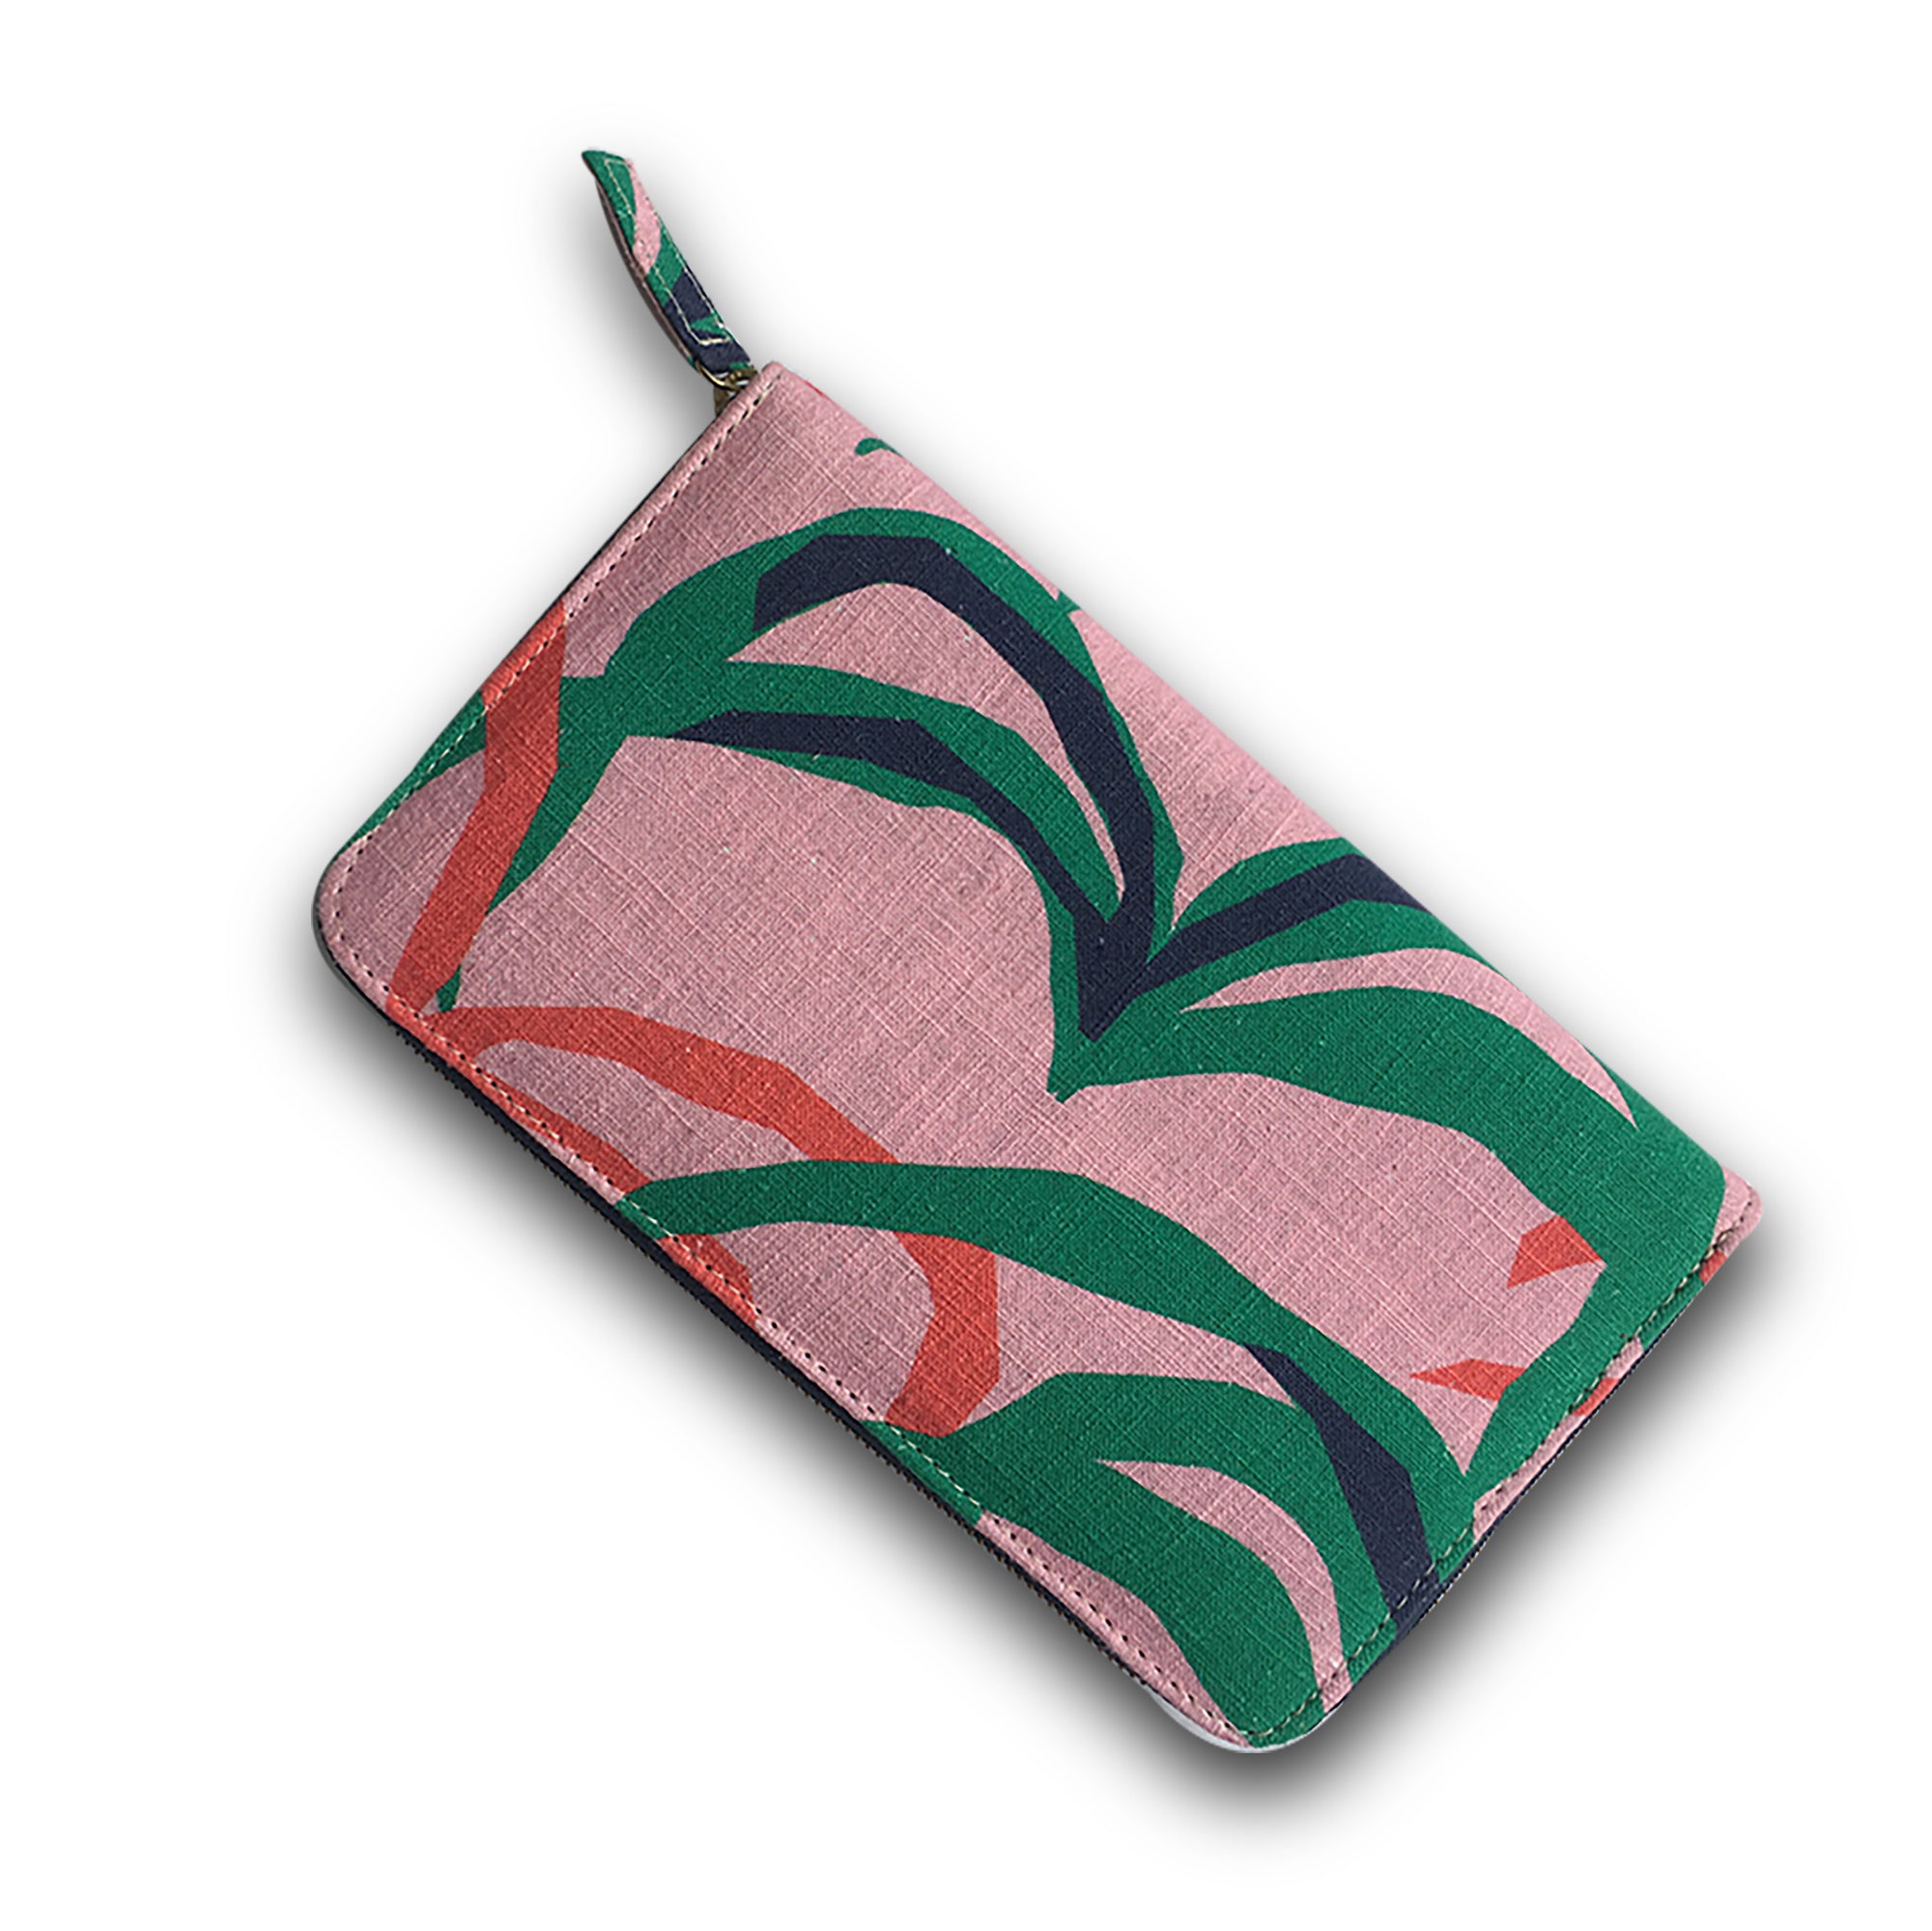 Penida Palm Printed Travelling Clutch Tropical Bali Style